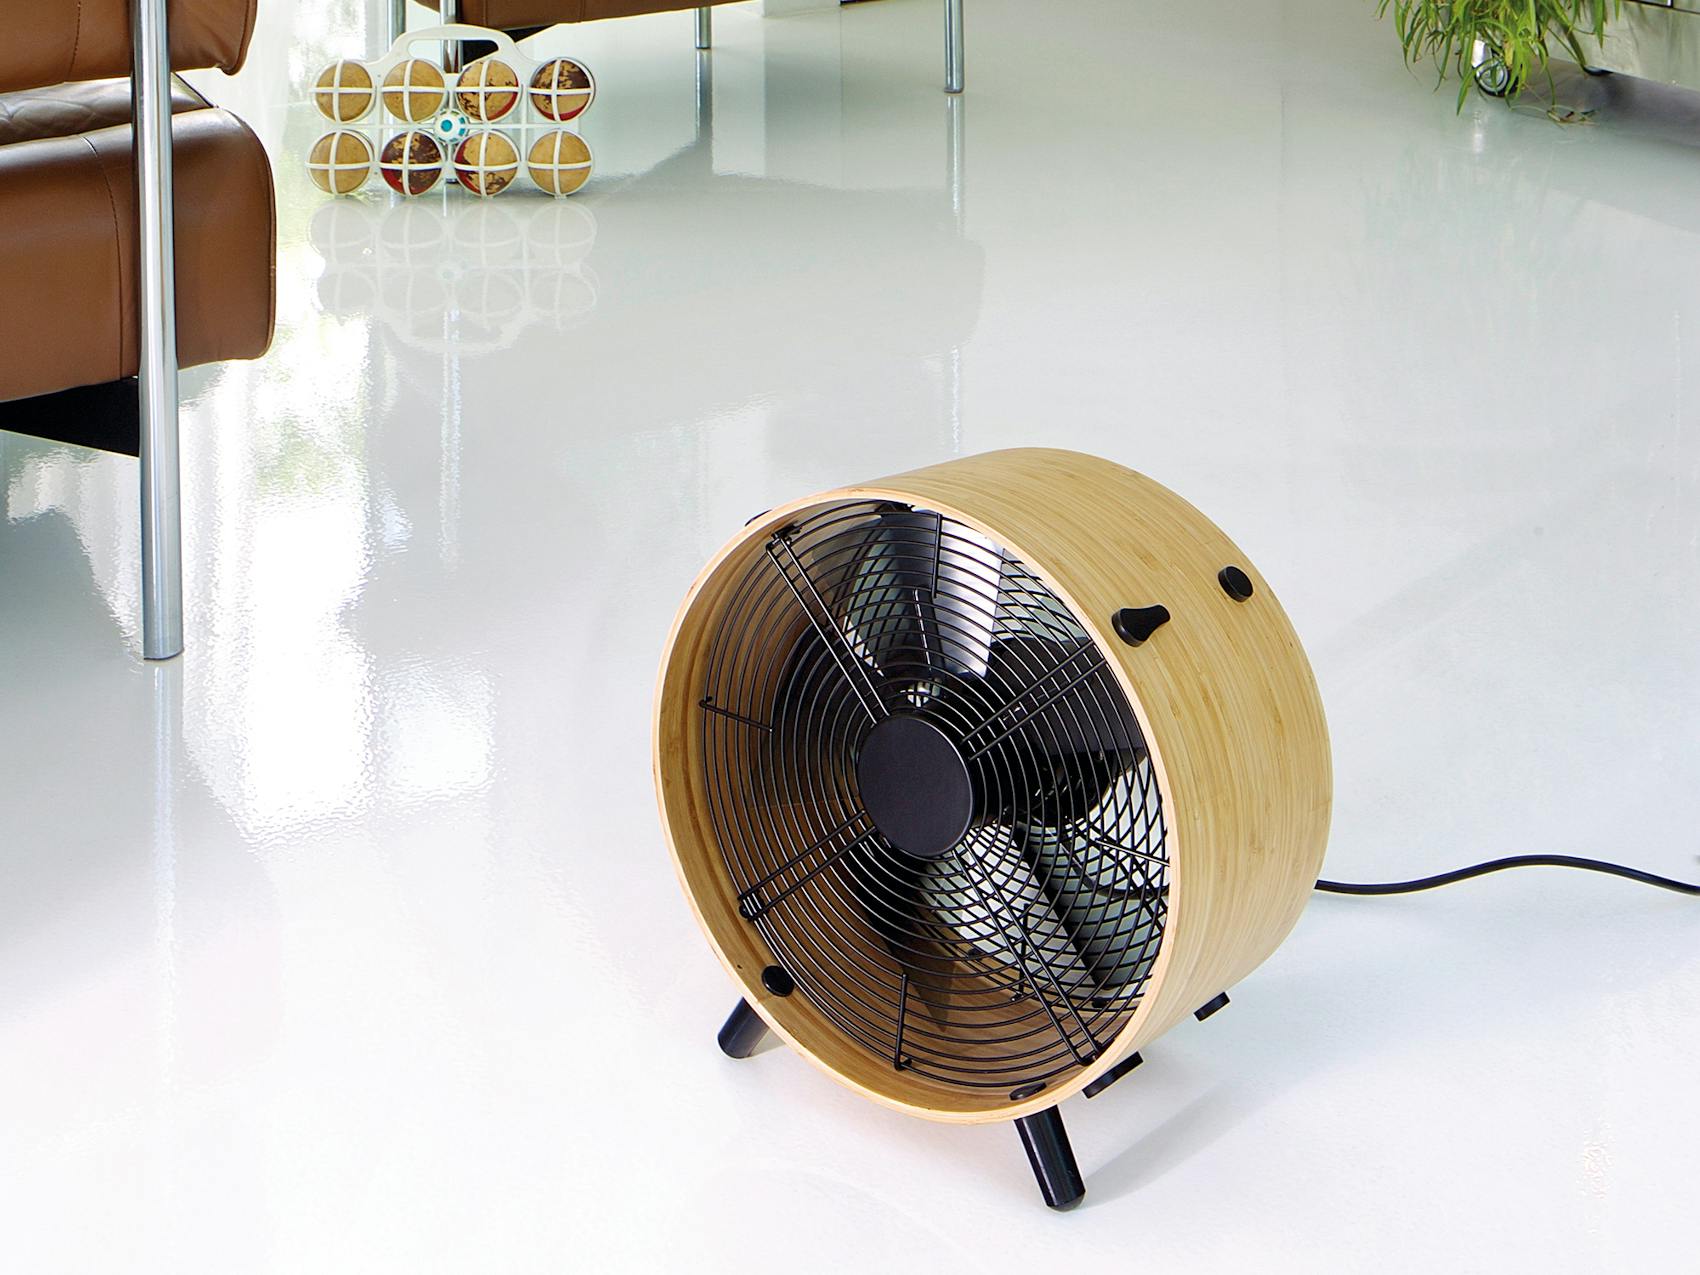 Otto bamboo fan by Stadler Form on the floor in a room